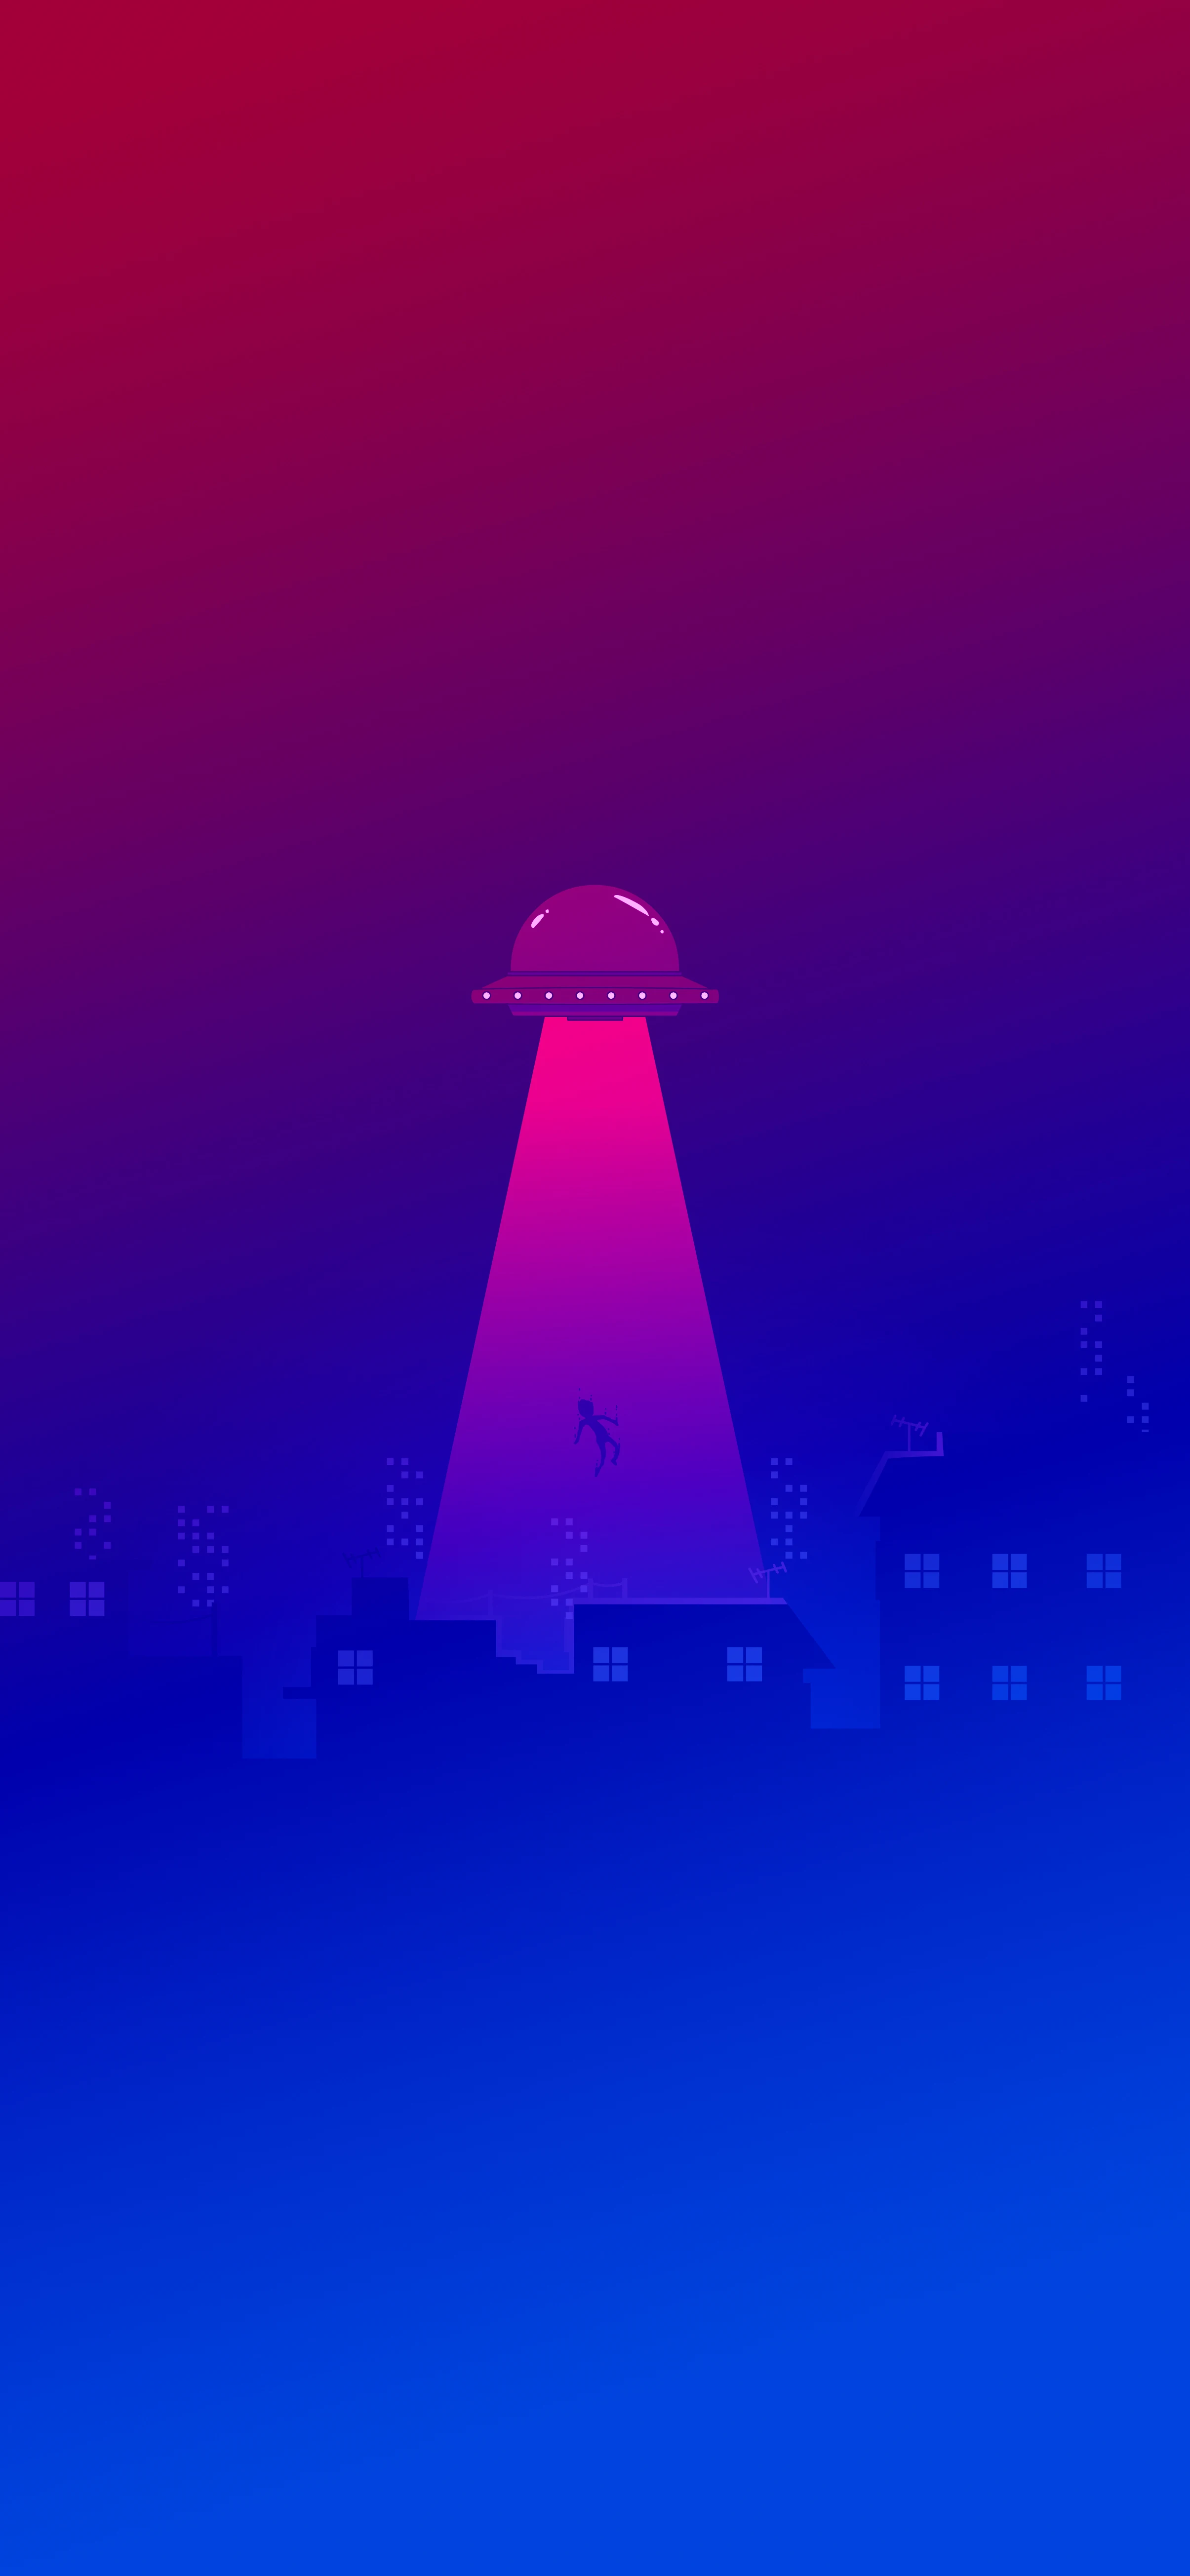 illustration of an ufo abduction to use as phone lockscreen background wallpaper